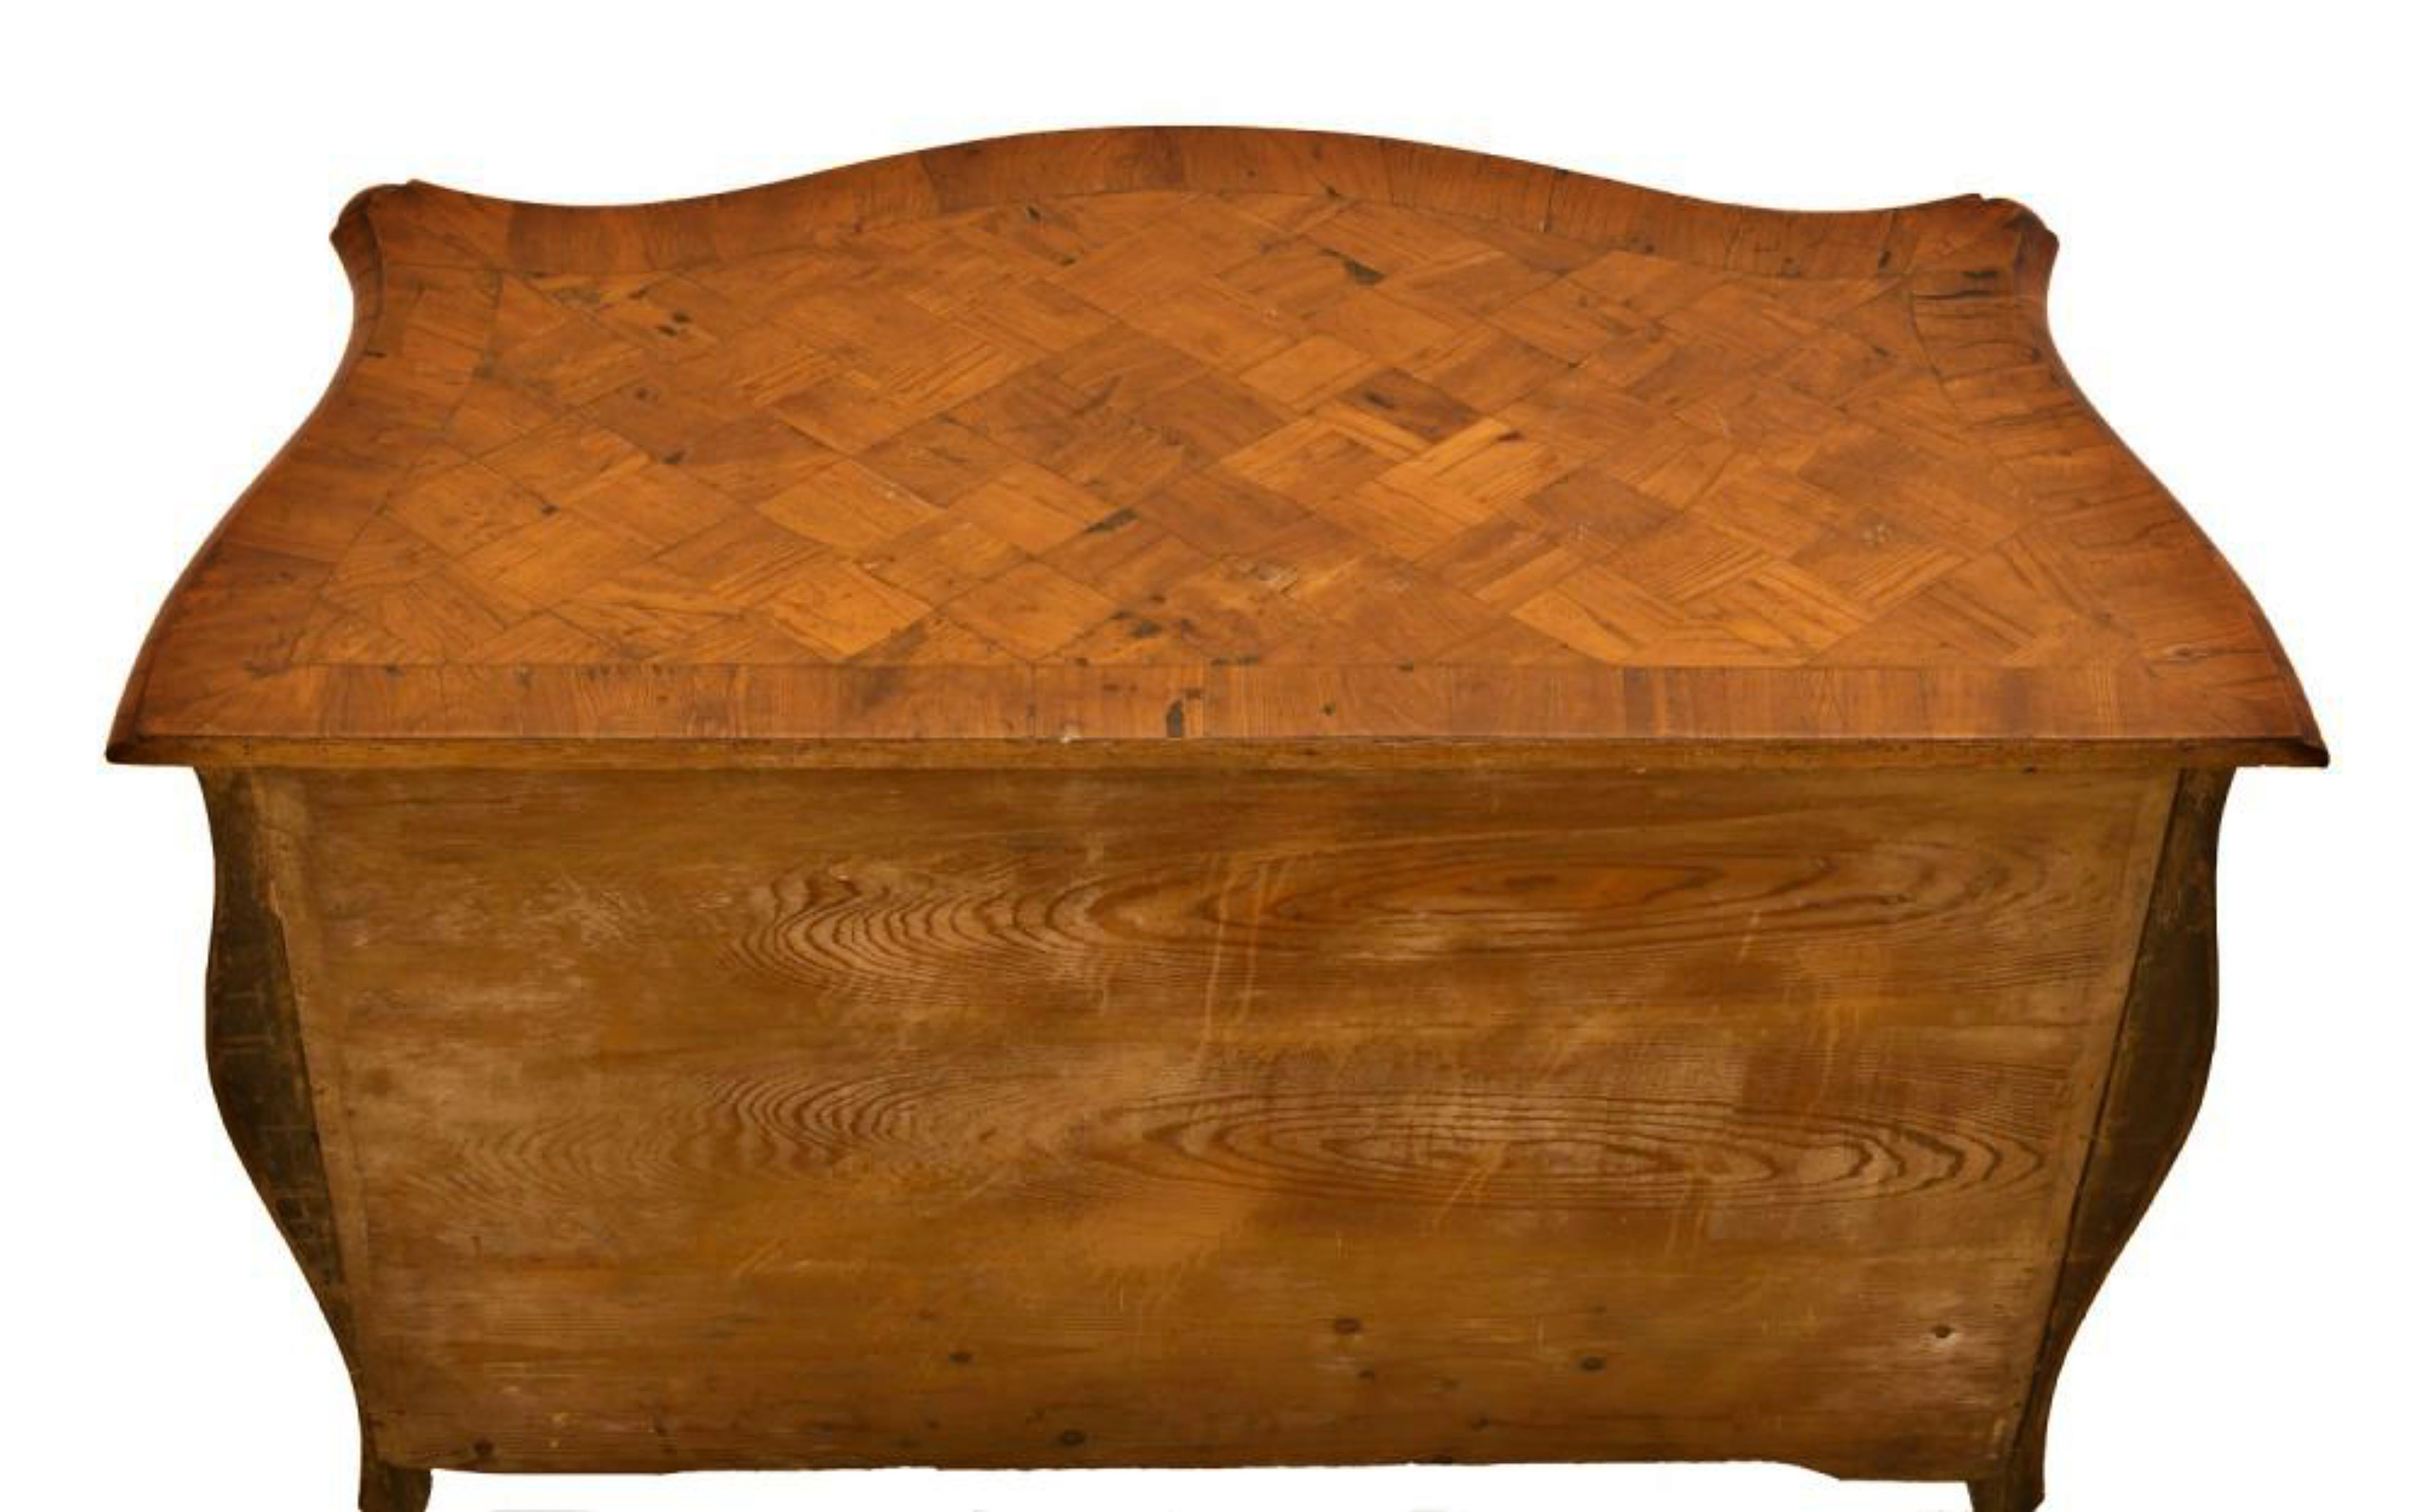 French Louis XV Chest of Drawers end 18th century
moved veneered with geometric inlays with three drawers
France
Dimensions:
cm 80x103x53
Wavy forehead and hips.
Enriched with gilded bronze elements along the side, on the keyhole, feet and handles.